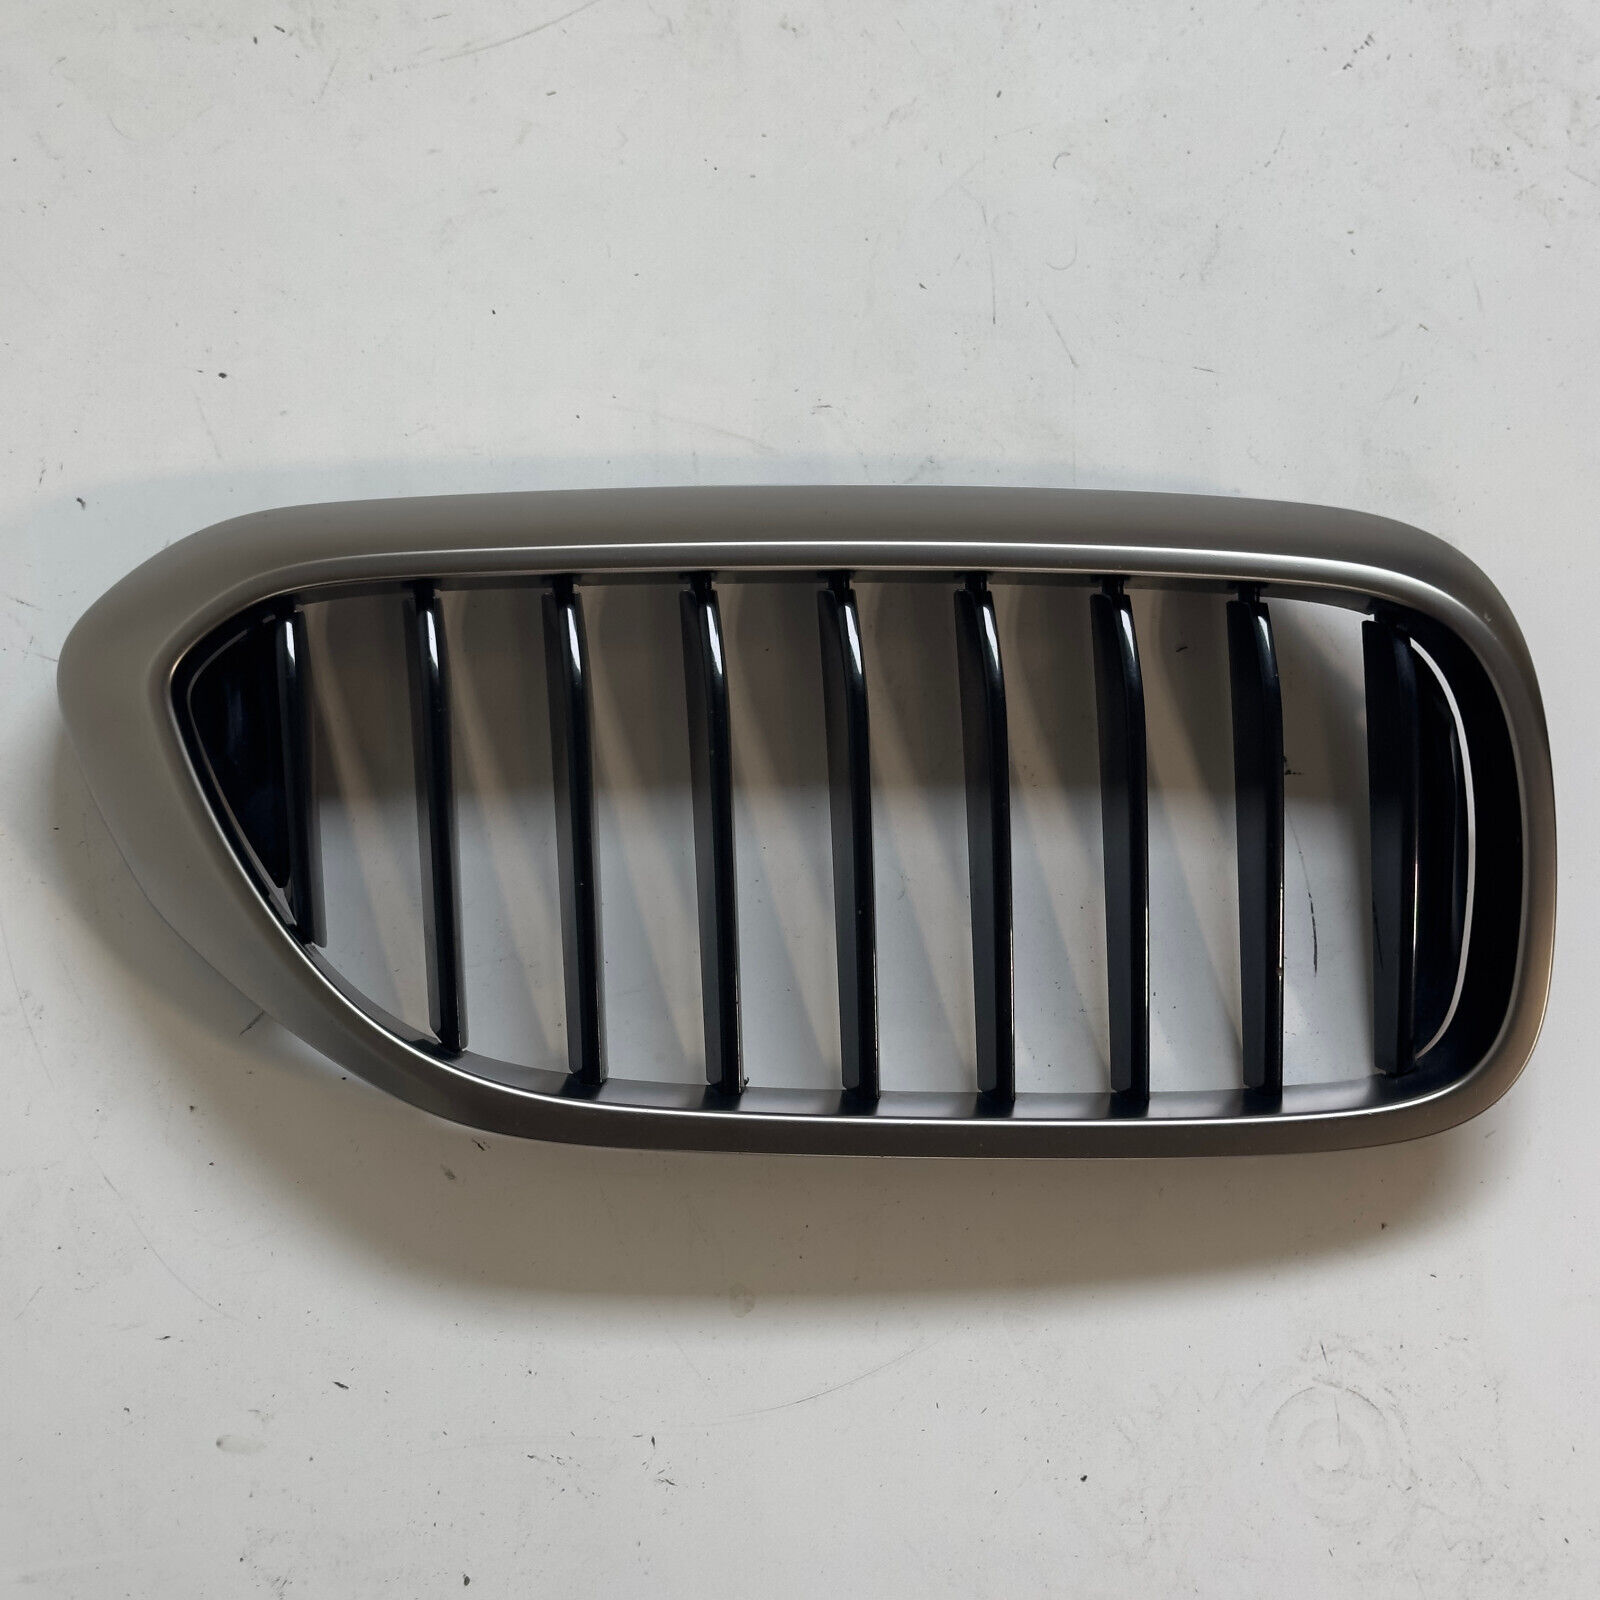 BMW G30 5 SERIES M550I FRONT RIGHT KIDNEY GRILLE PASSENGER SIDE CERIUM GREY GRAY